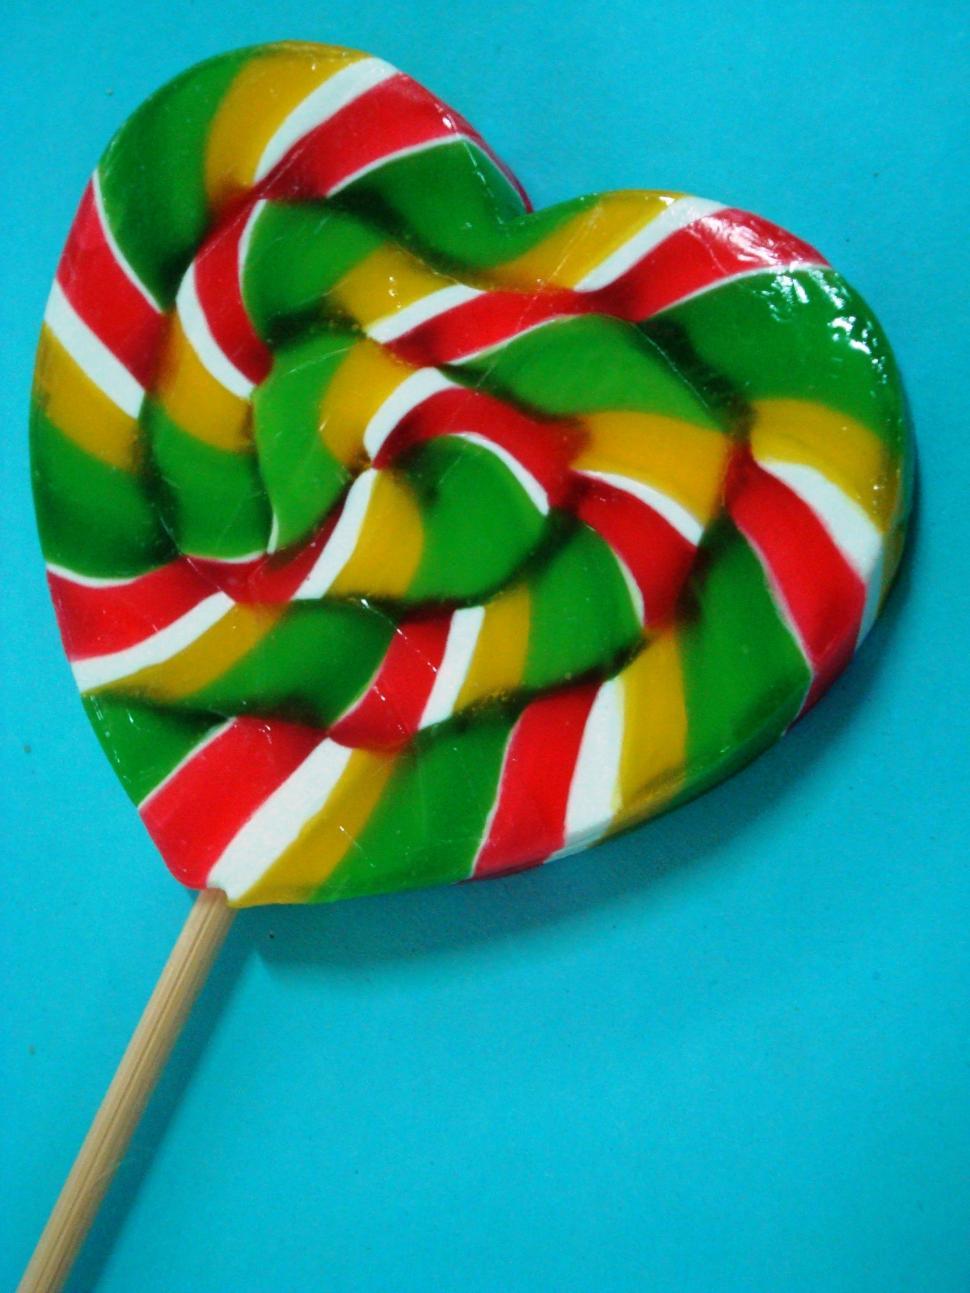 Free Image of Colorful Lollipop 